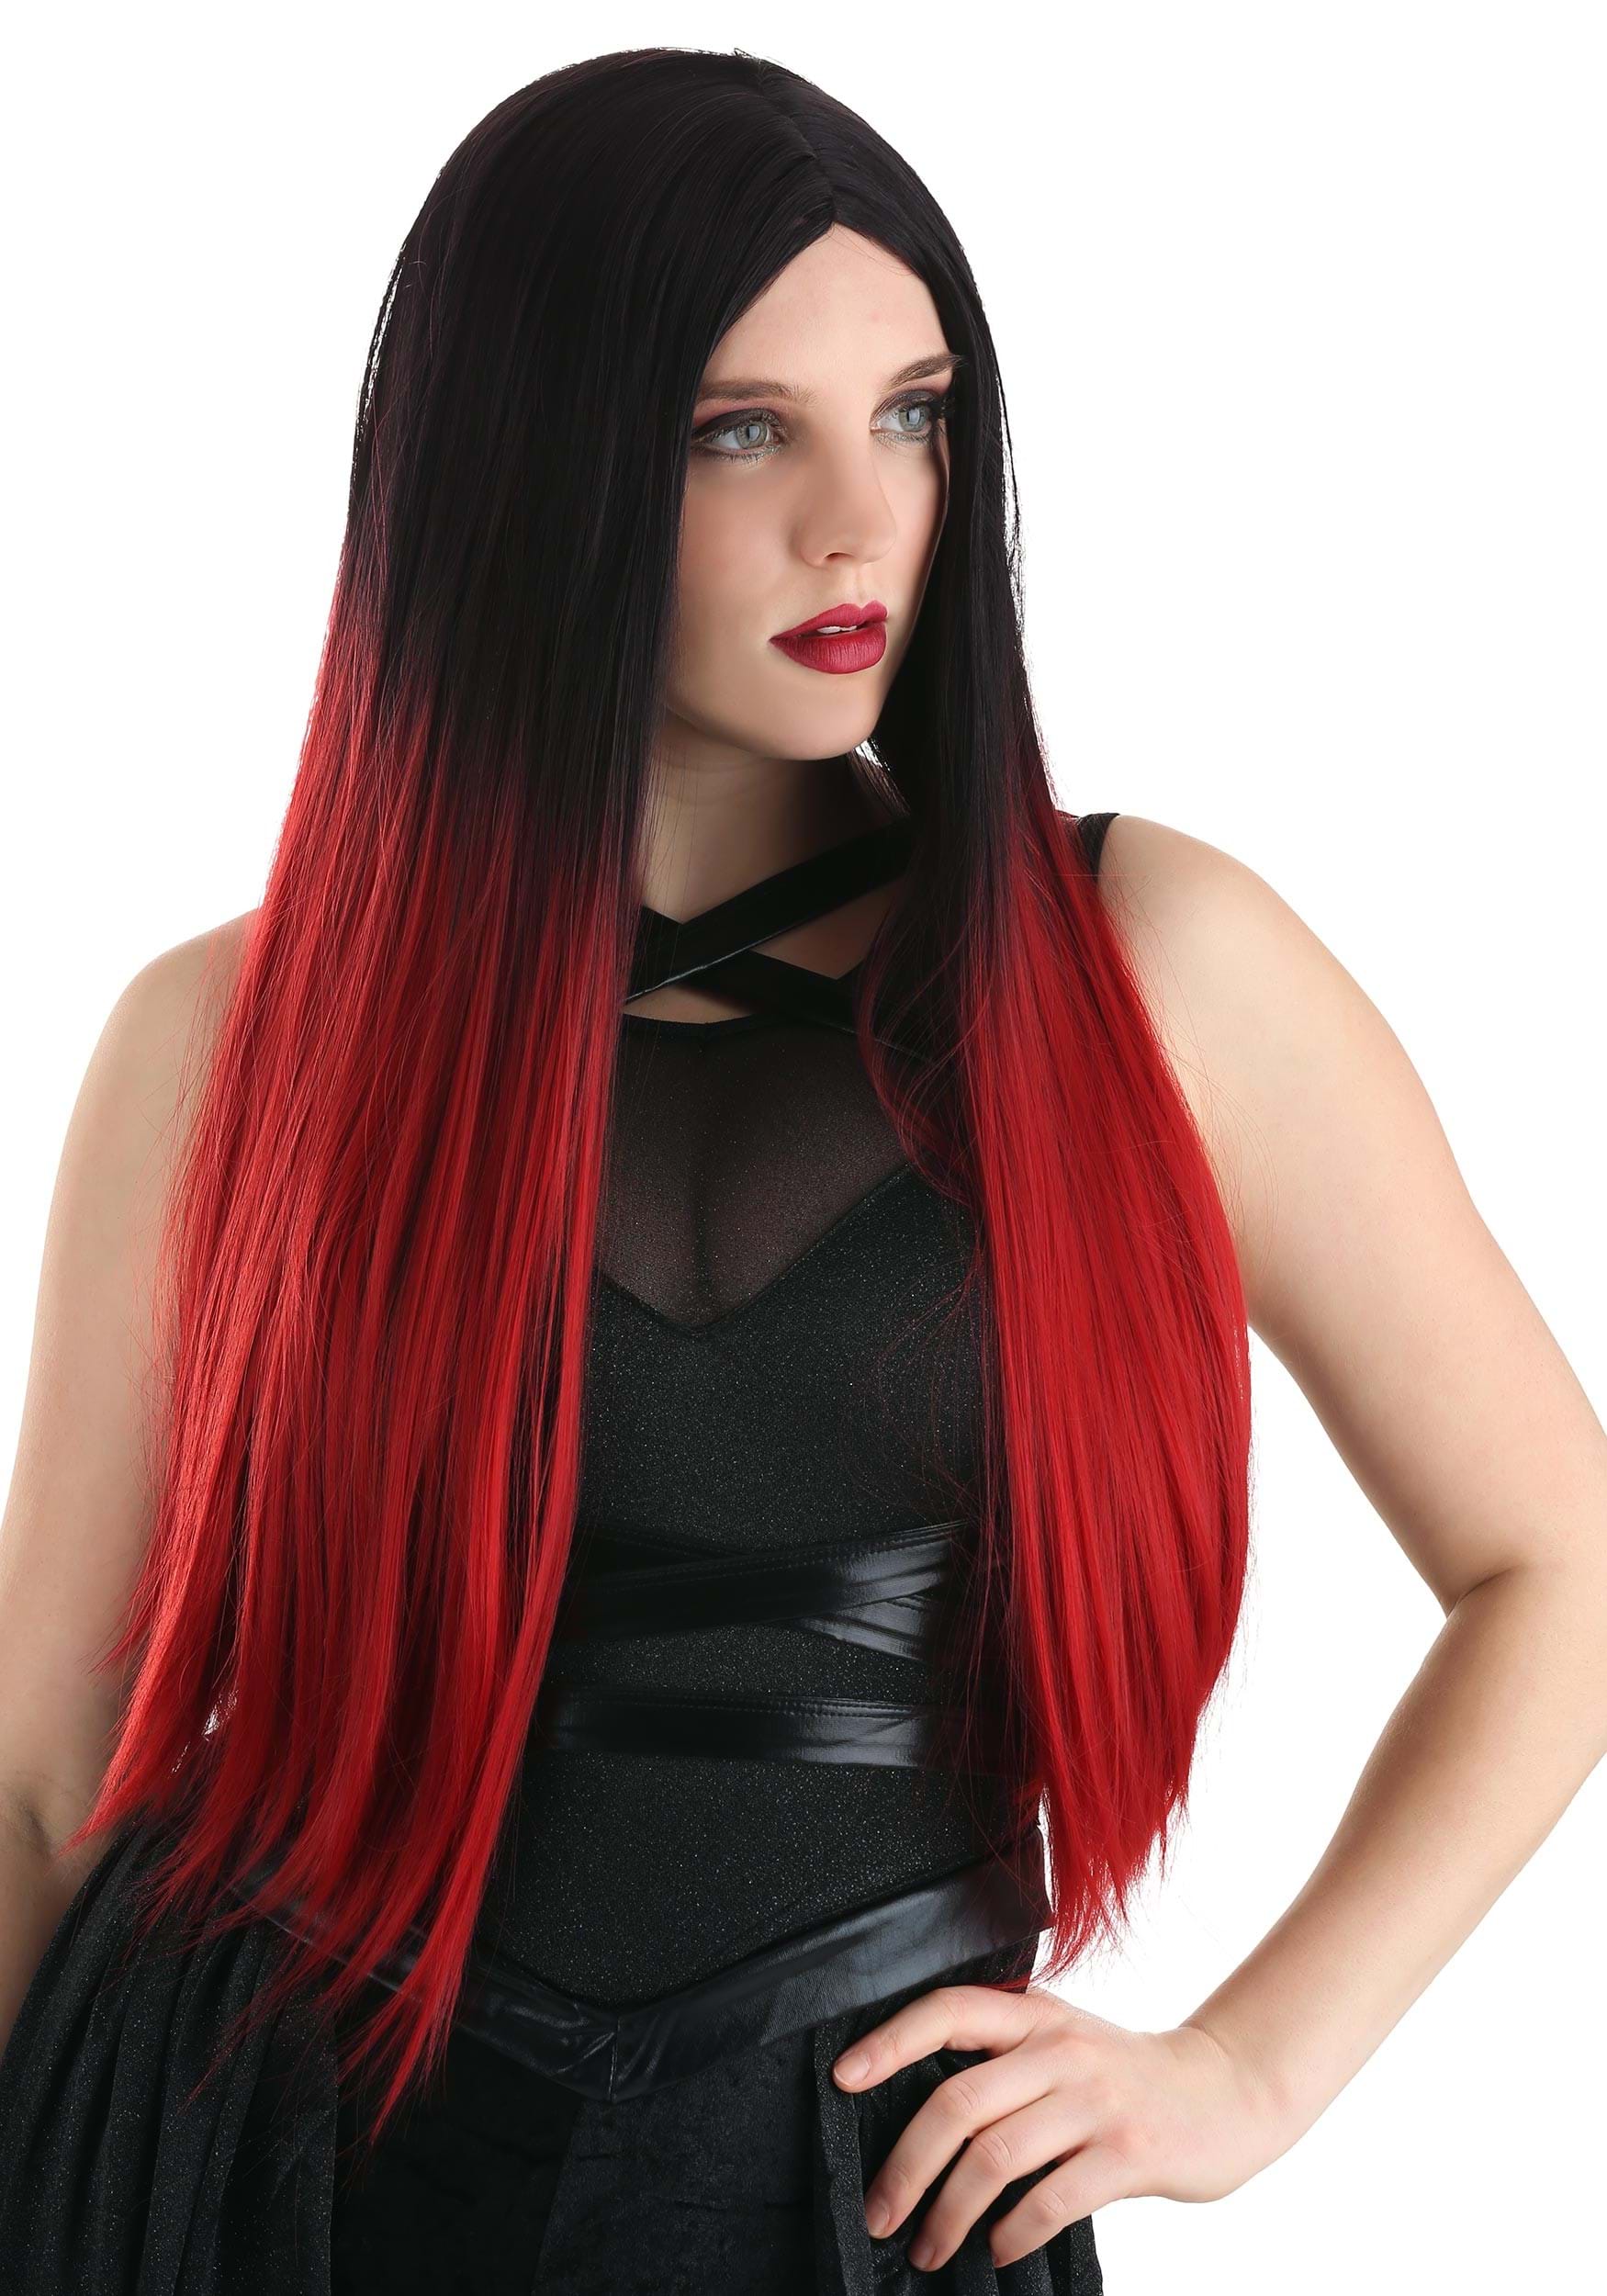 https://images.halloweencostumes.com/products/67076/1-1/black-and-red-ombre-wig.jpg